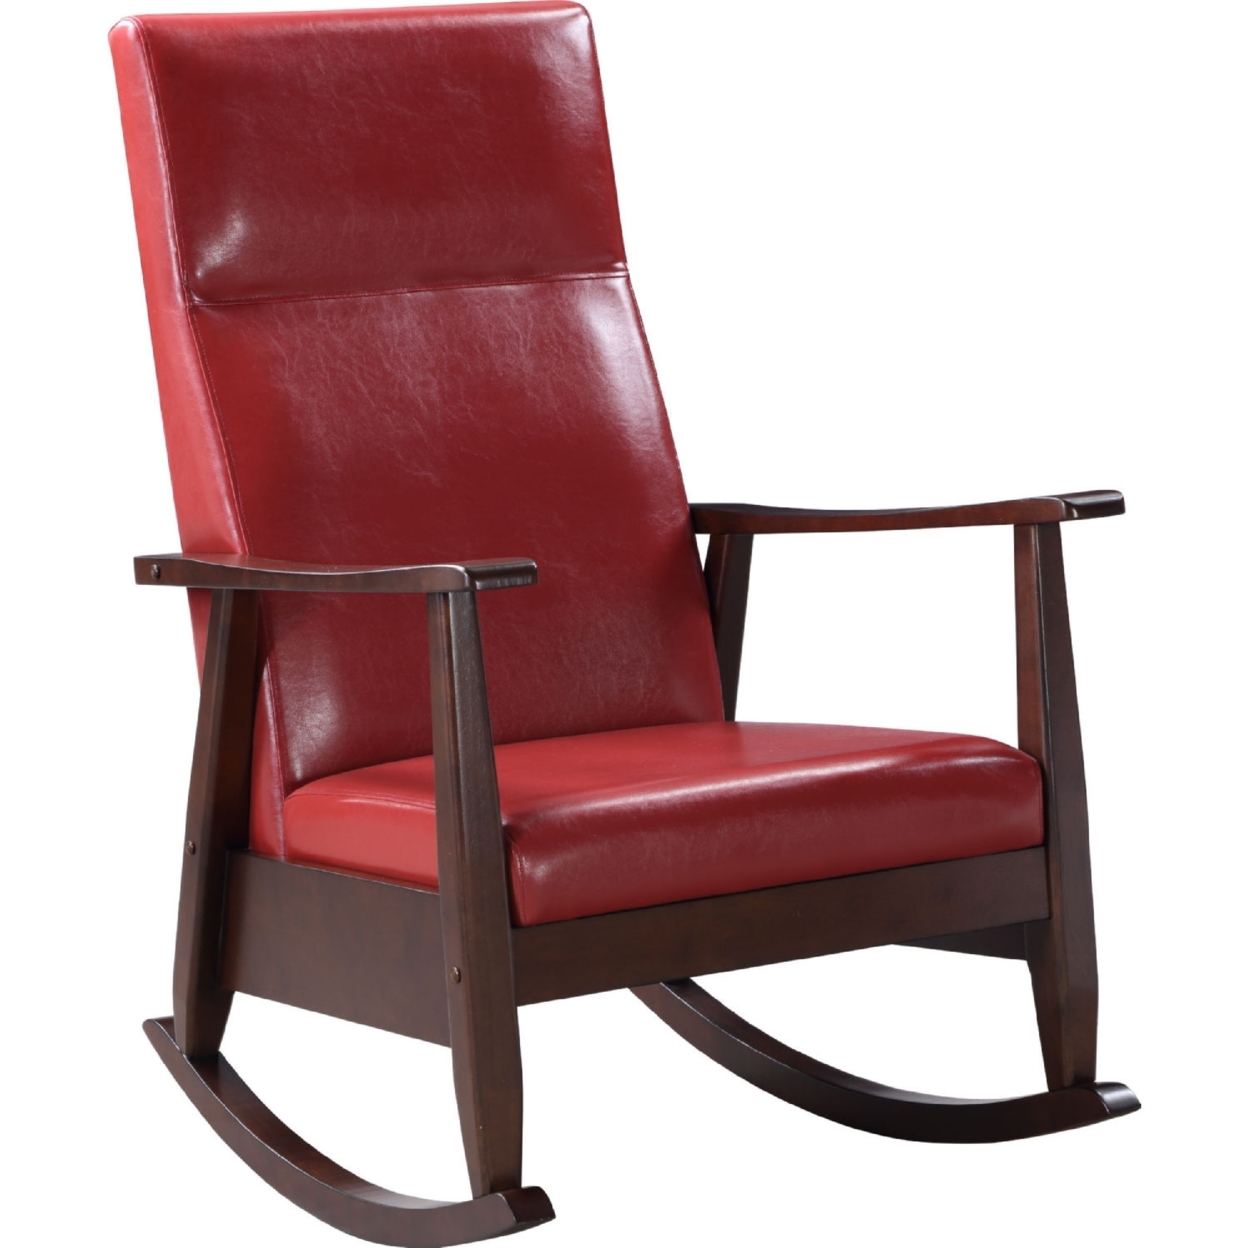 Rocking Chair With Leatherette Seating And Wooden Frame, Red- Saltoro Sherpi